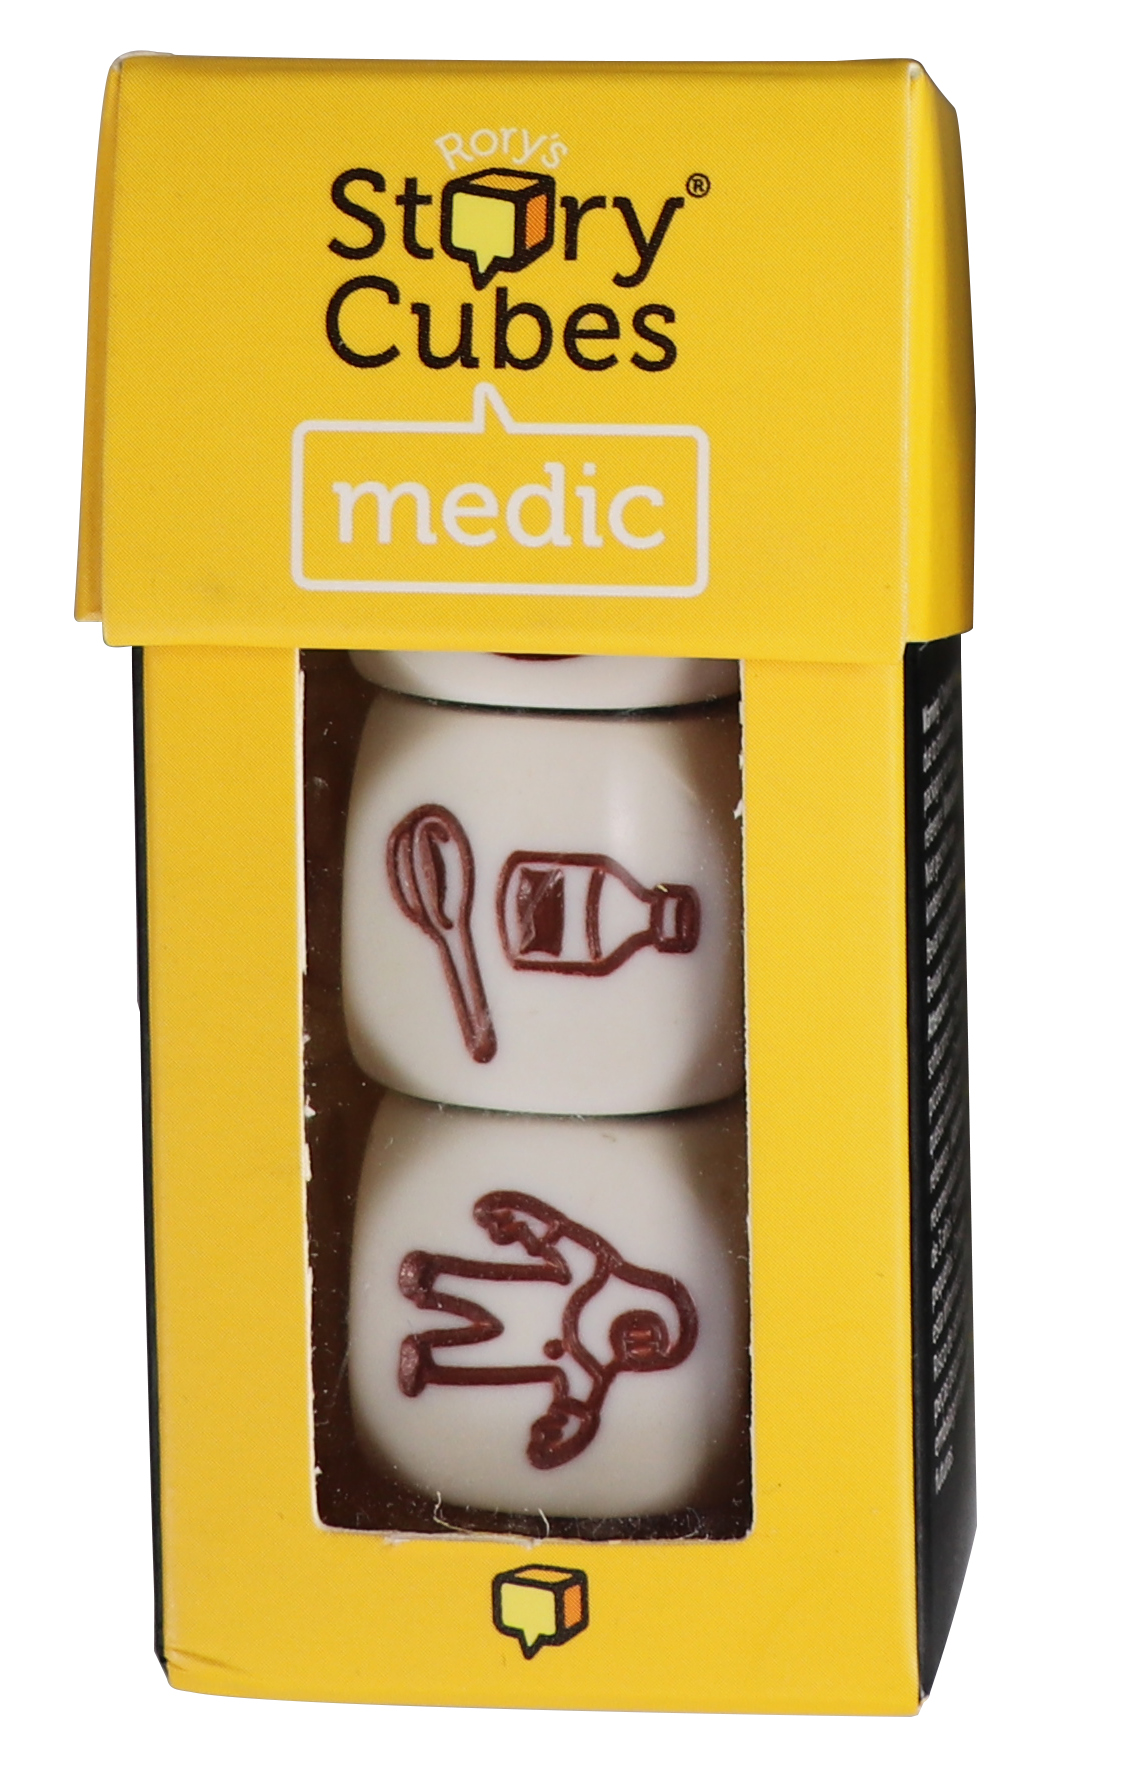 Story Cubes - Medic | Rory\'s Story Cubes